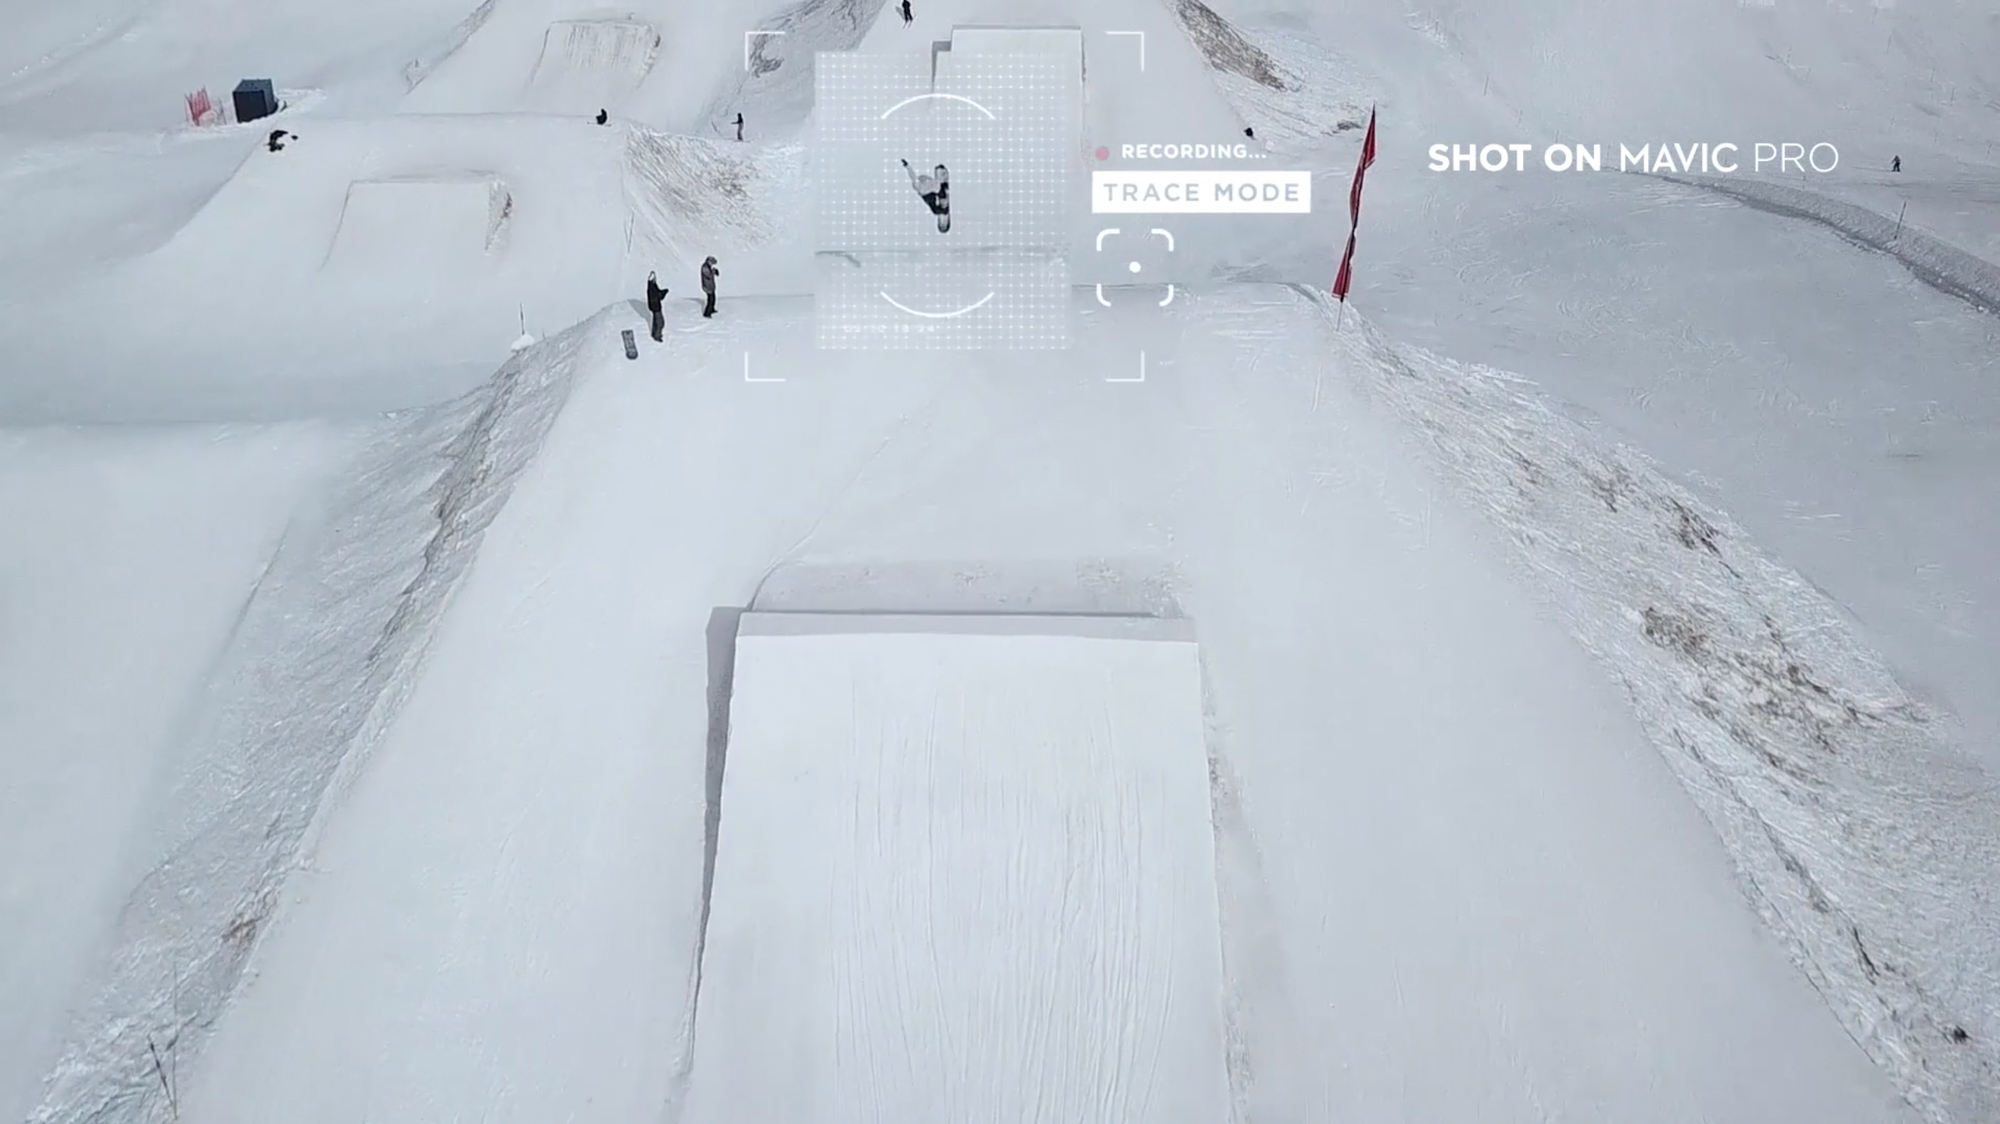 The Mavic can follow a snowboarder automatically using its Active Track modes.